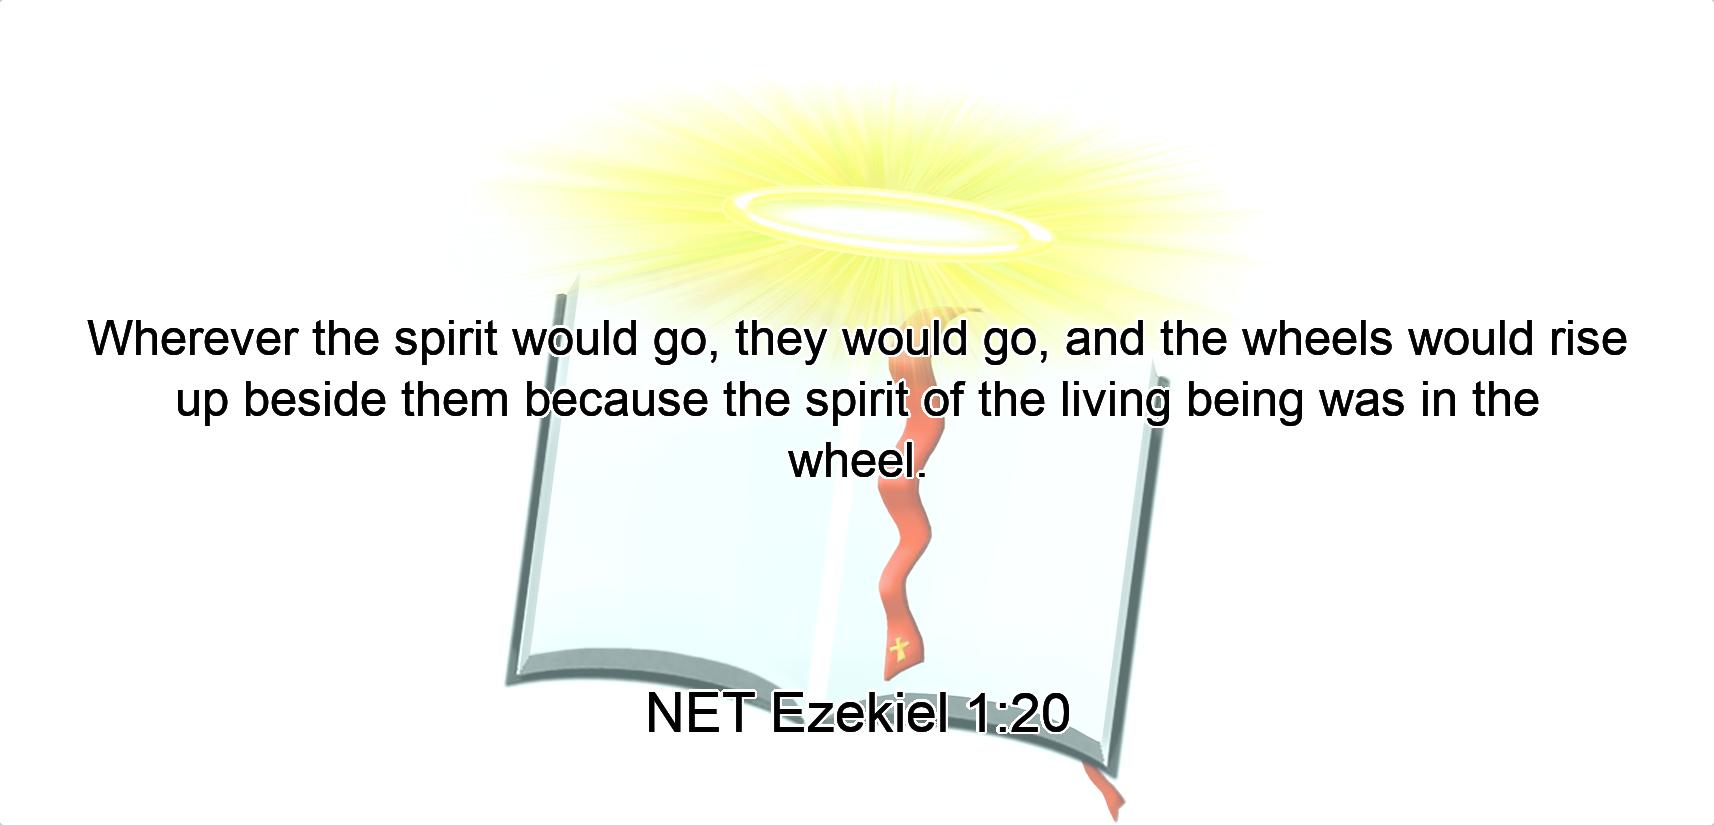 Wherever the spirit  would go, they would go,  and the wheels would rise up beside them because the spirit  of the living being was in the wheel.